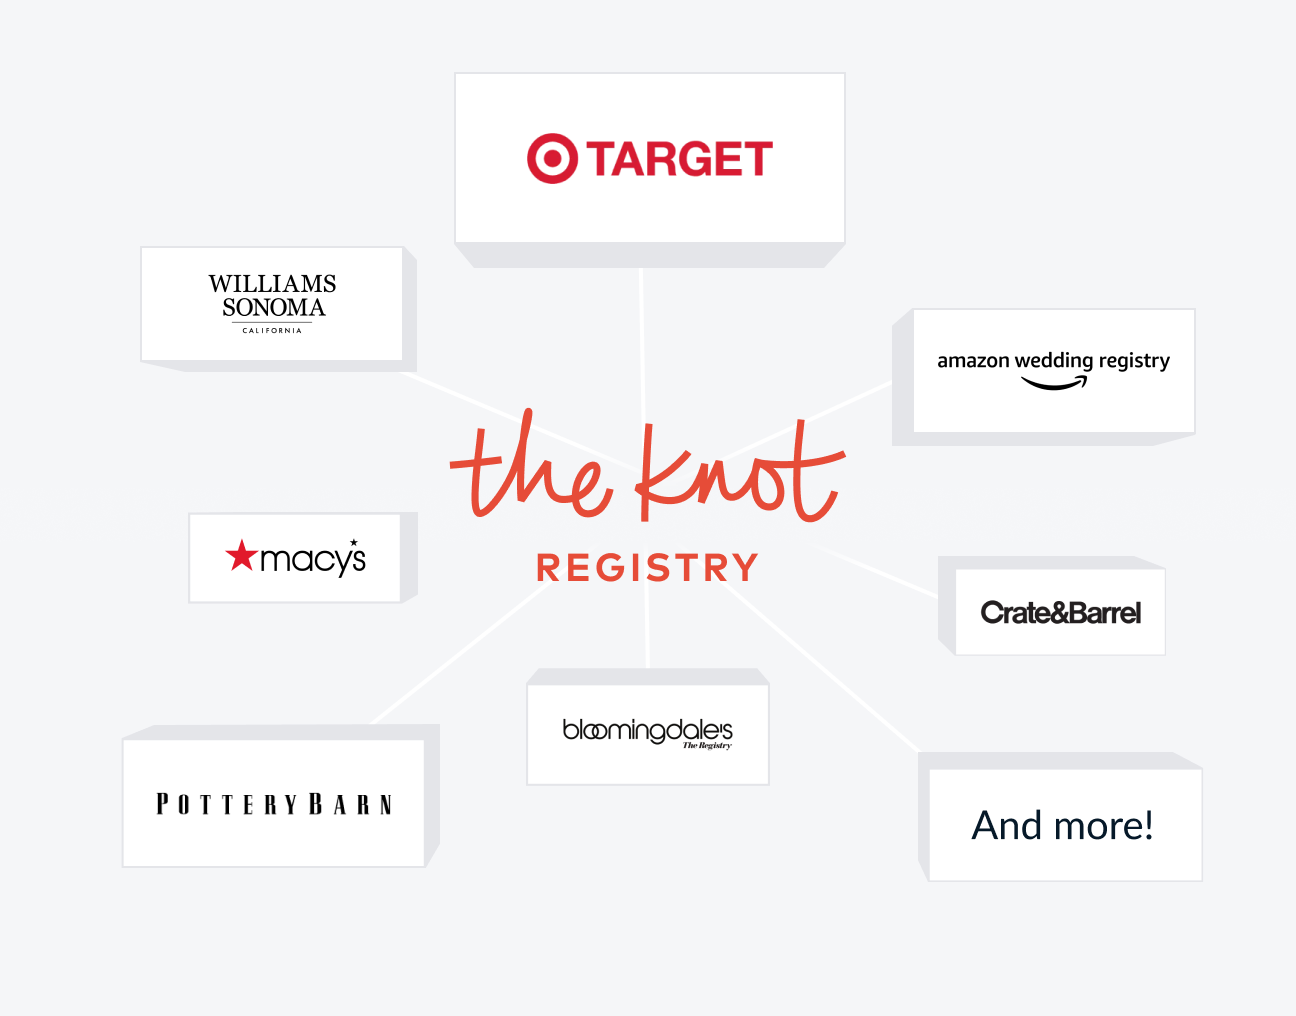 A graphic with "The Knot Registry" logo in the center surrounded by store logos including Target, Williams Sonoma, Macy's, Amazon, Crate & Barrel, Pottery Barn and Bloomingdale's.